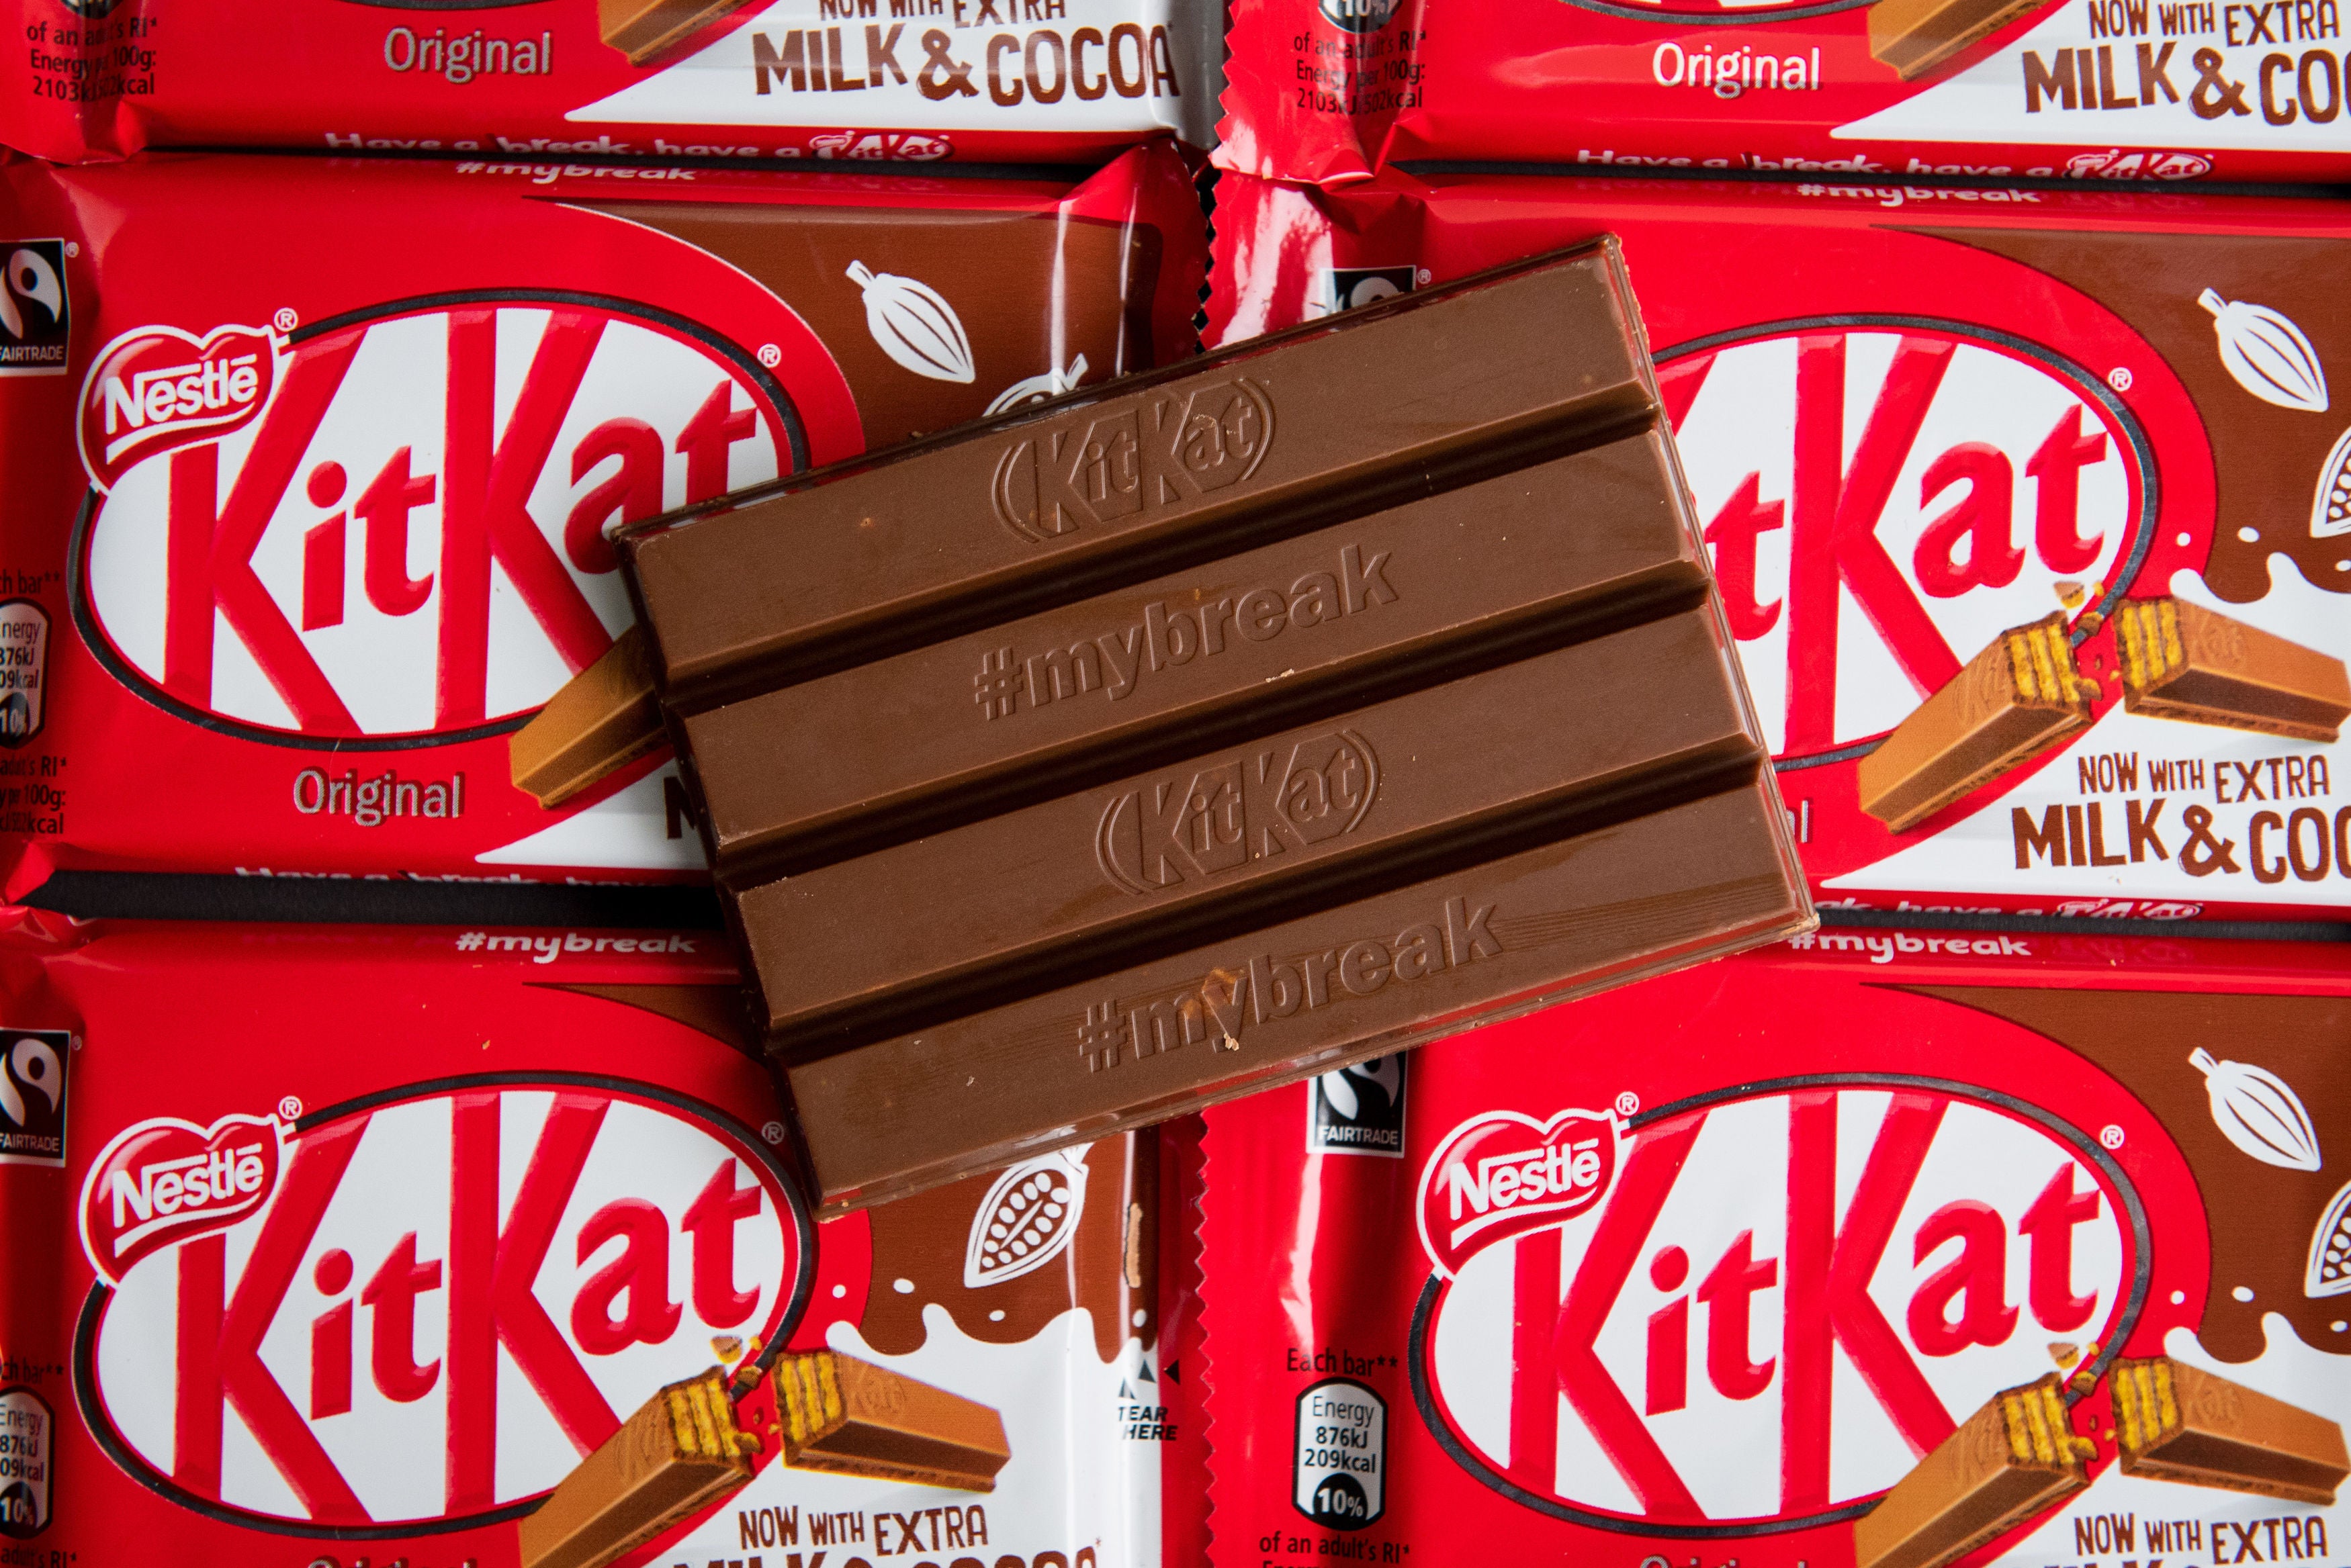 KitKat maker Nestle has lifted prices further, blaming ‘unprecedented’ cost inflation (Dominic Lipinski/PA)